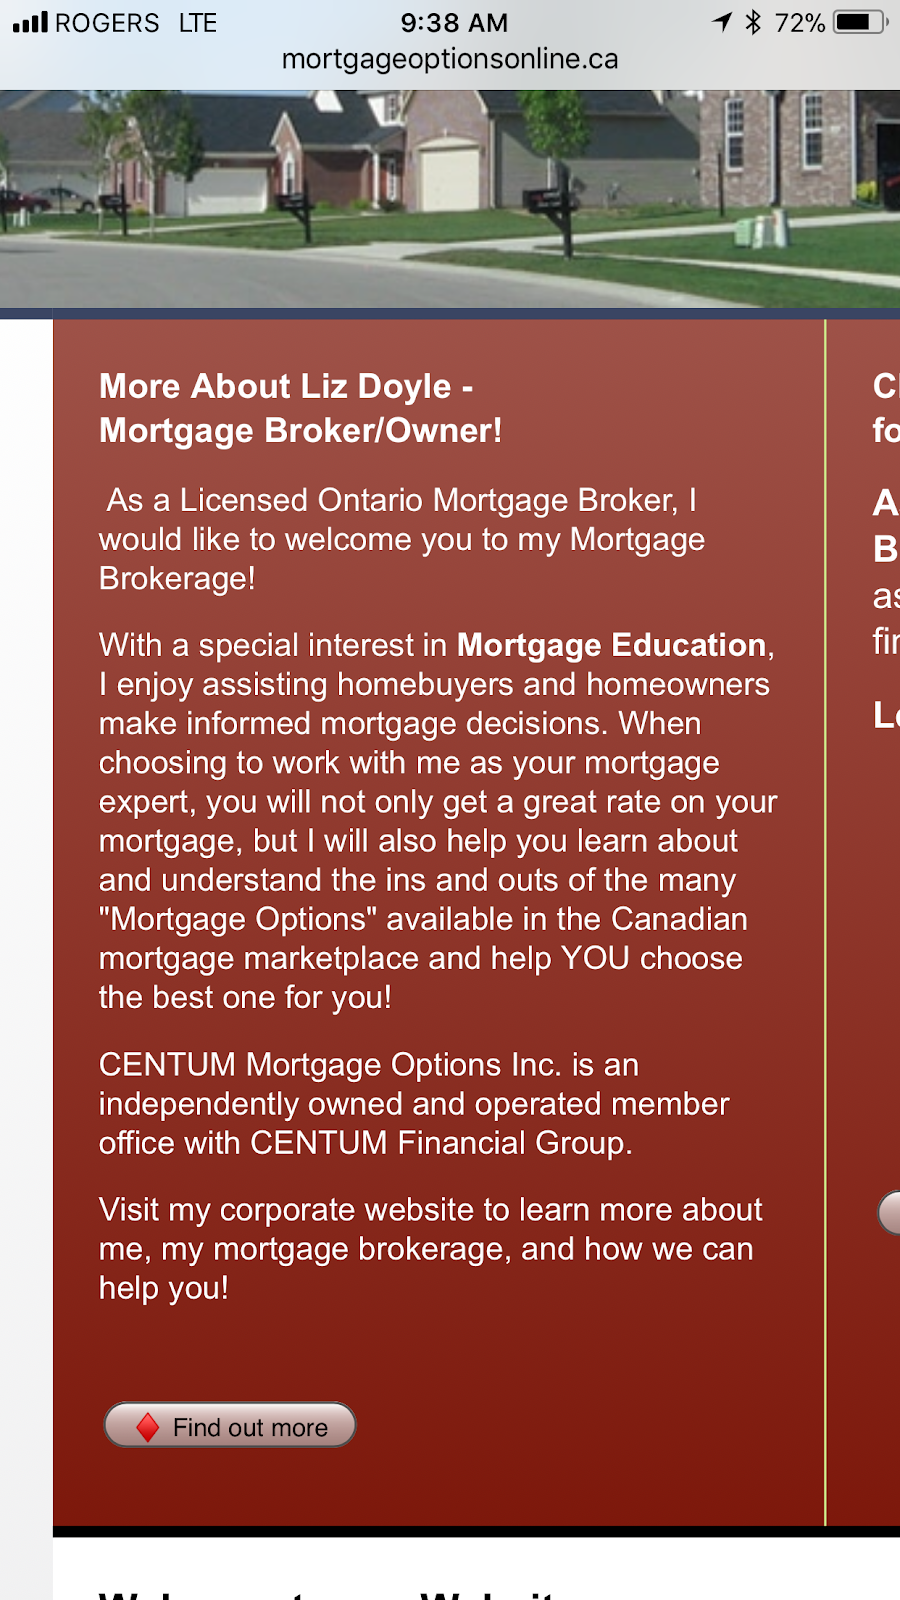 CENTUM Mortgage Options Inc. | 9 Patrick Dr, Whitby, ON L1R 2L1, Canada | Phone: (905) 666-1234 ext. 701